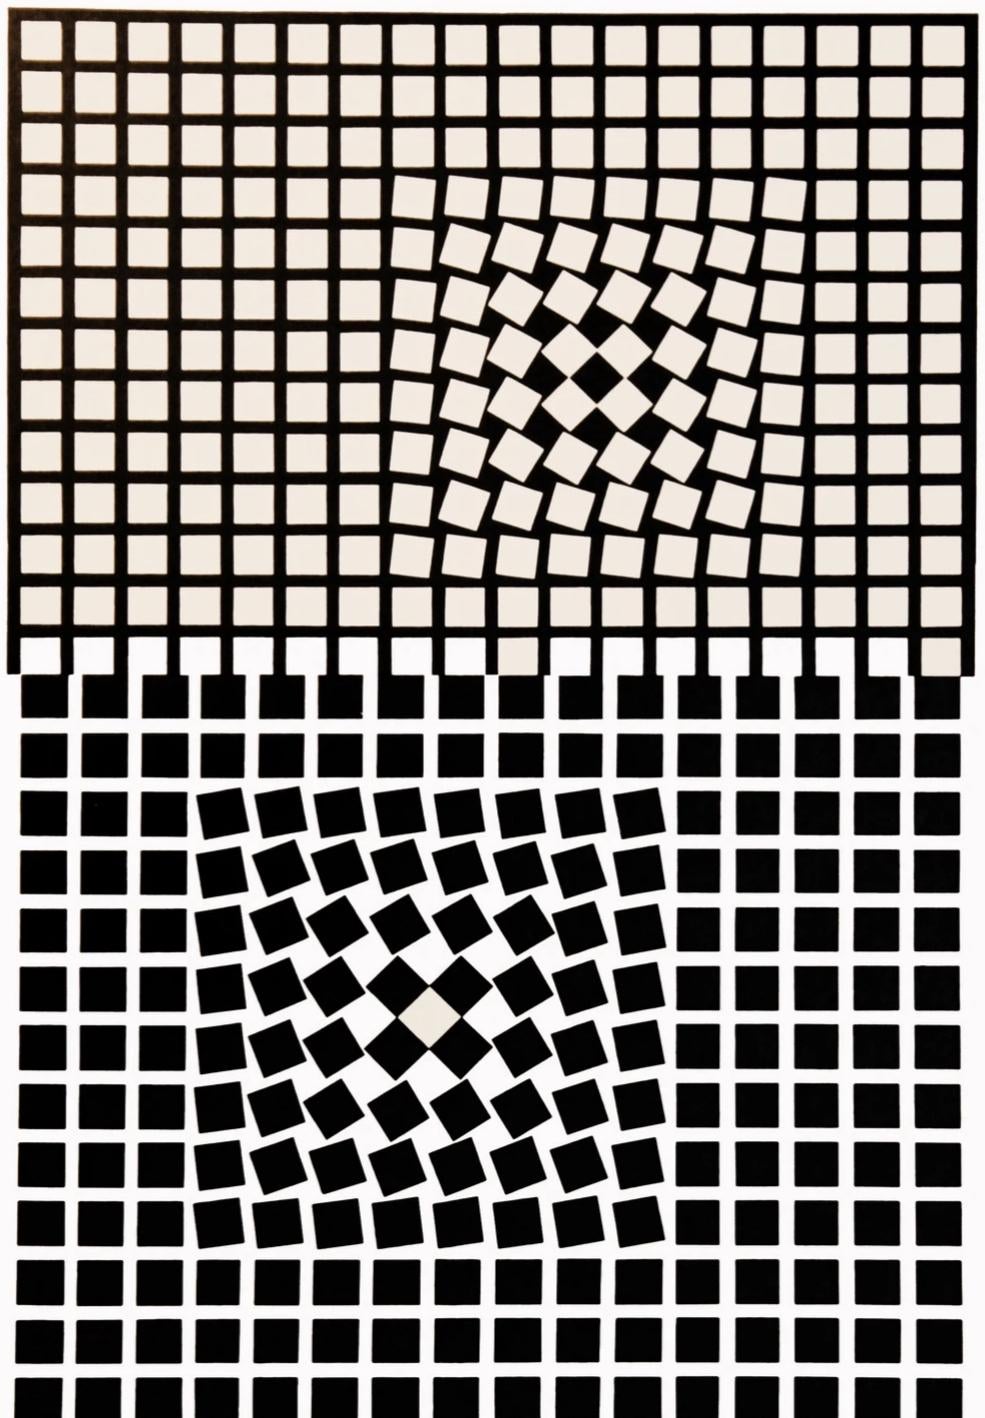 Abstract Print Victor Vasarely - Vasarely, Composition, Corpusculaires (après)